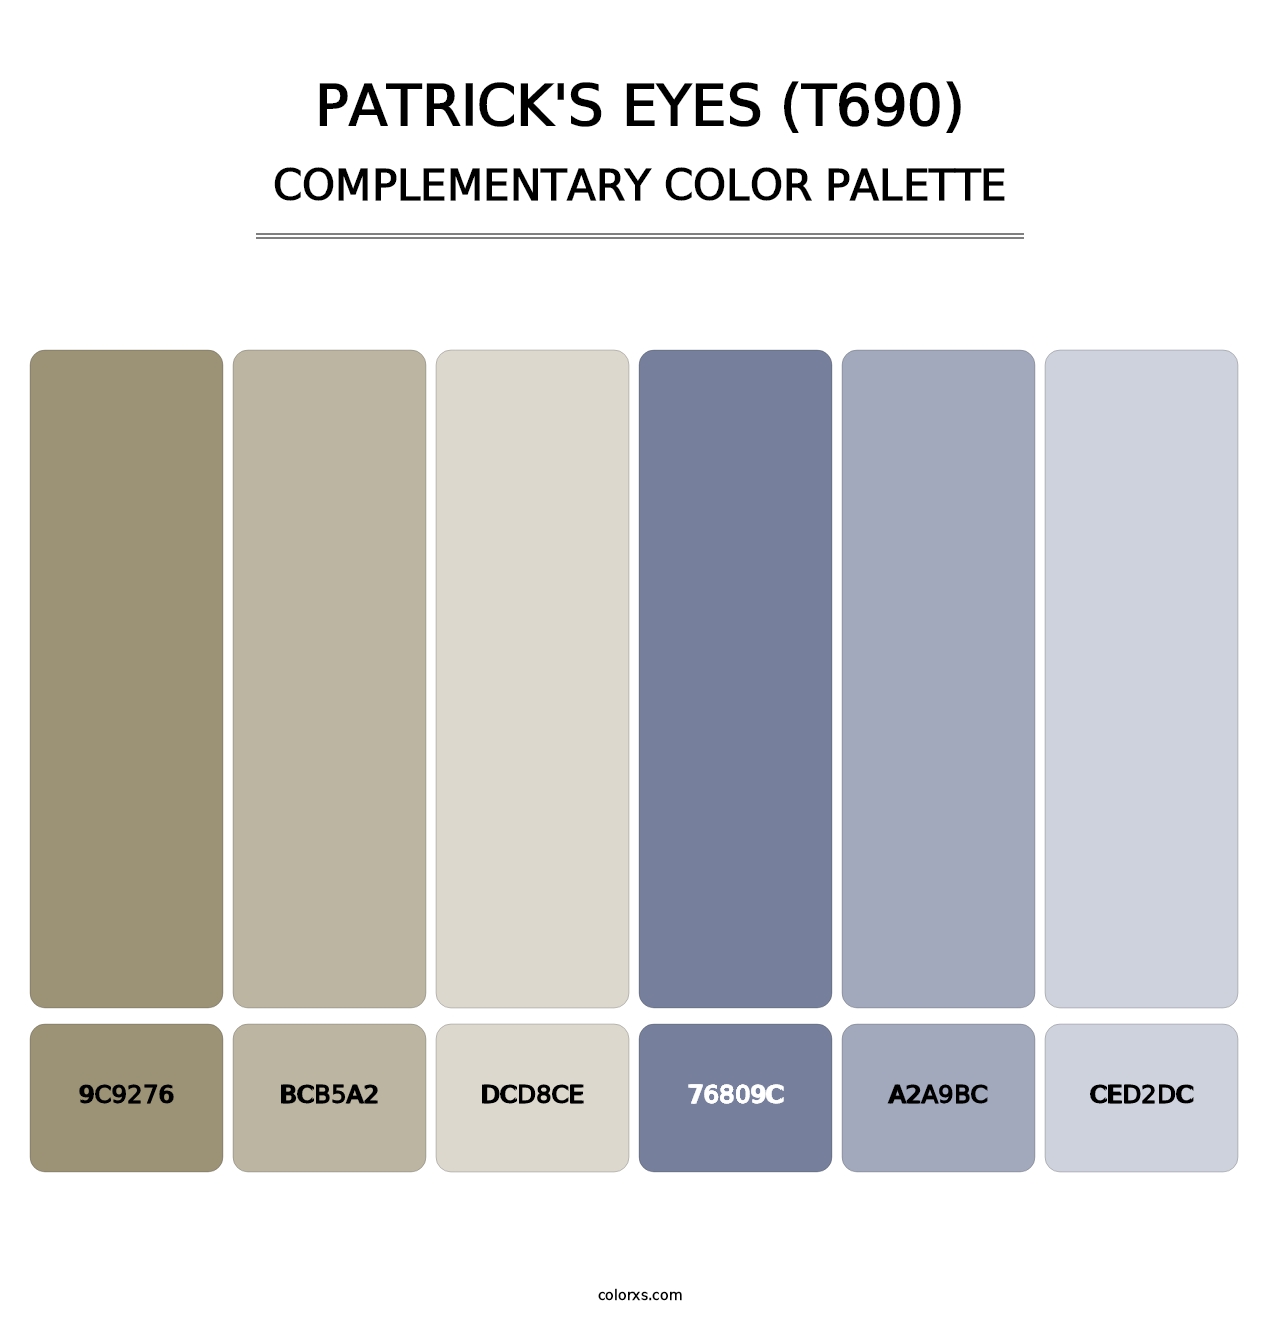 Patrick's Eyes (T690) - Complementary Color Palette